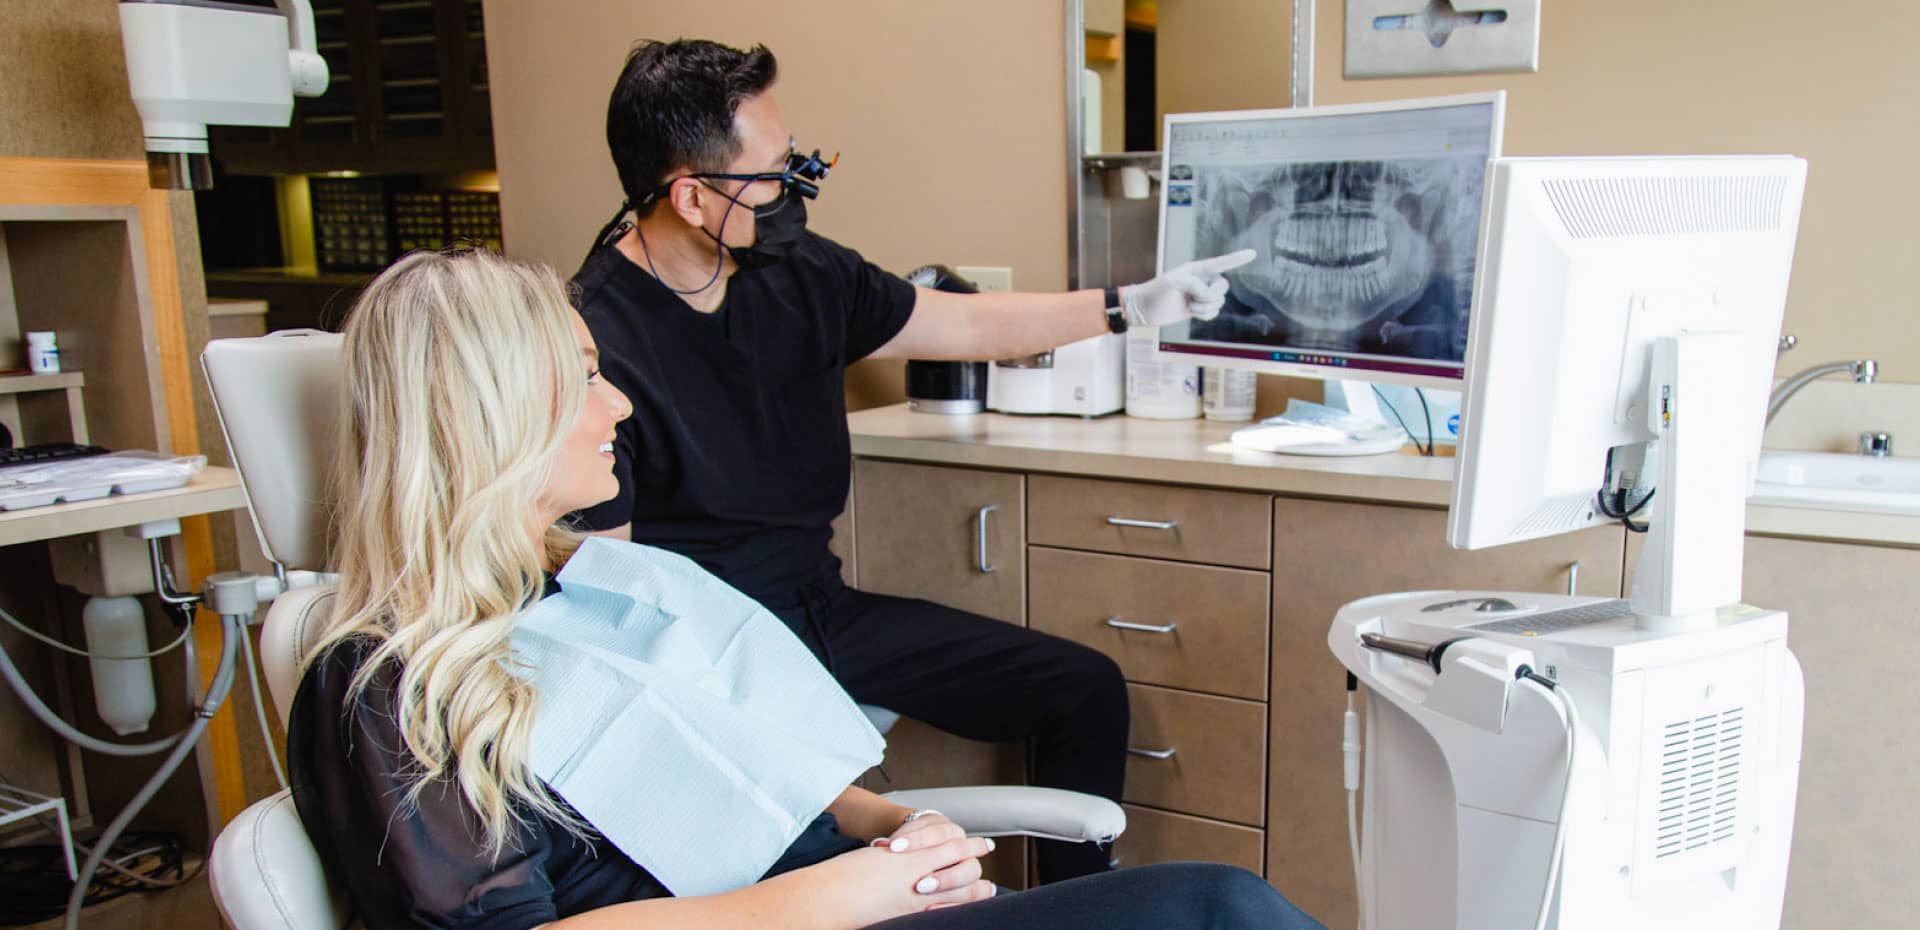 Dr. Sim pointing to dental x-ray on computer monitor sitting next to patient in dental chair